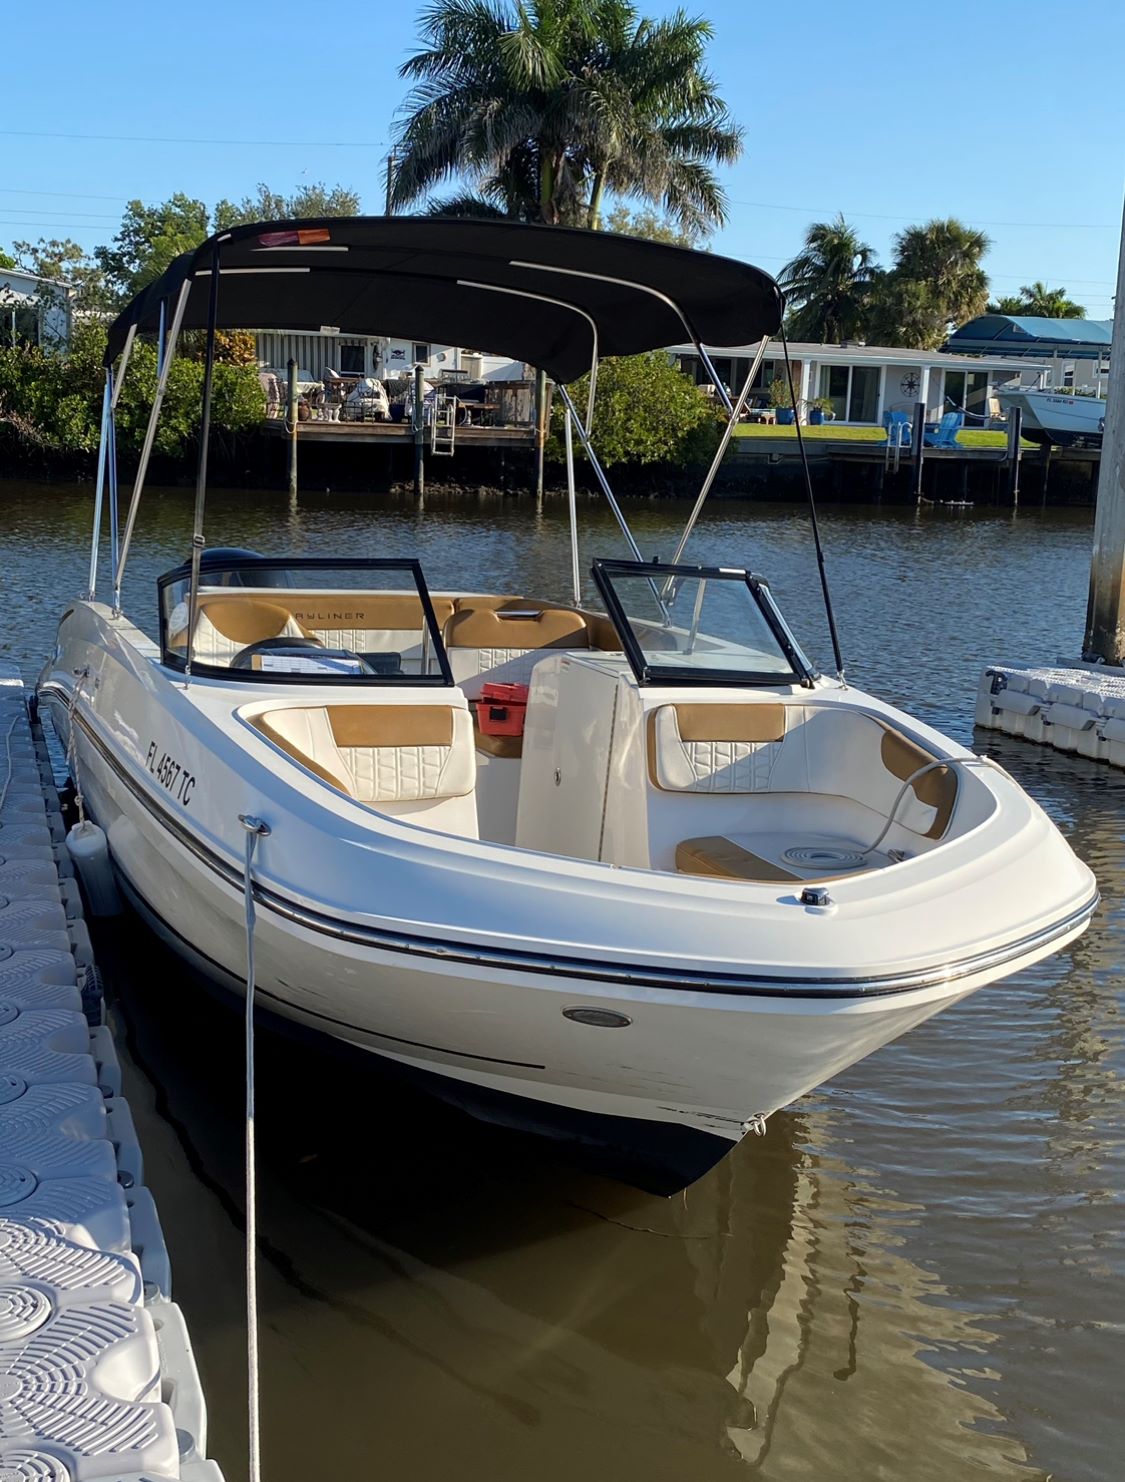 DOUBLE VISION (Bayliner 22' Deck Boat 150 HP - Cruising)